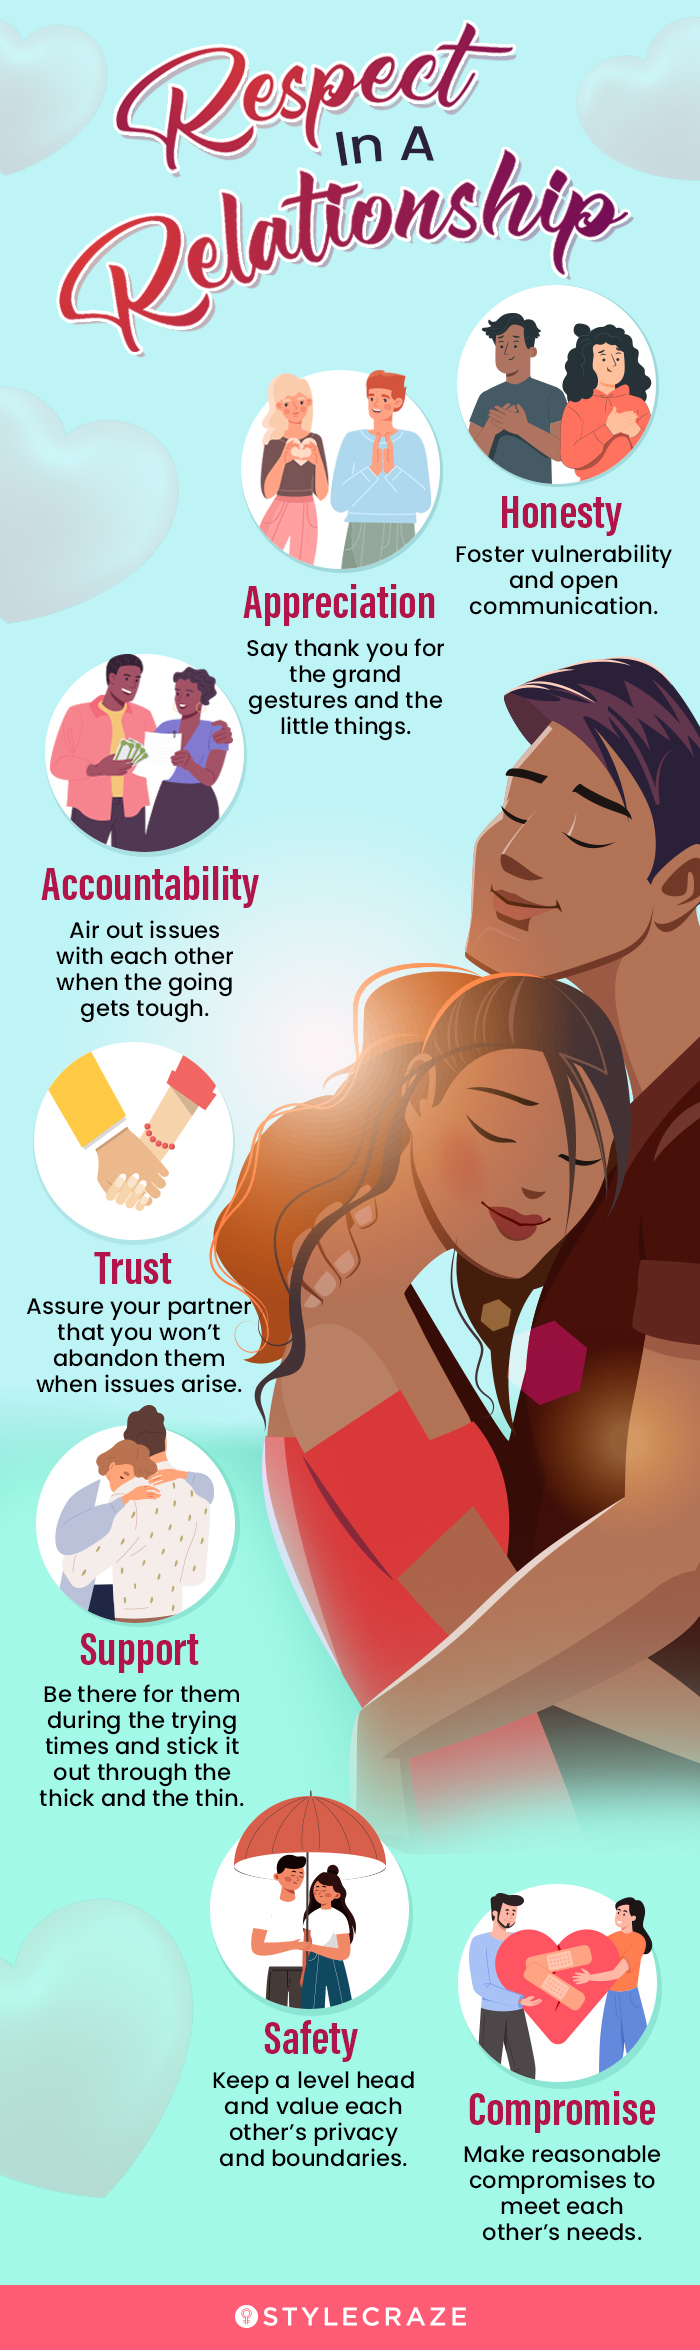 respect in a relationship [infographic]